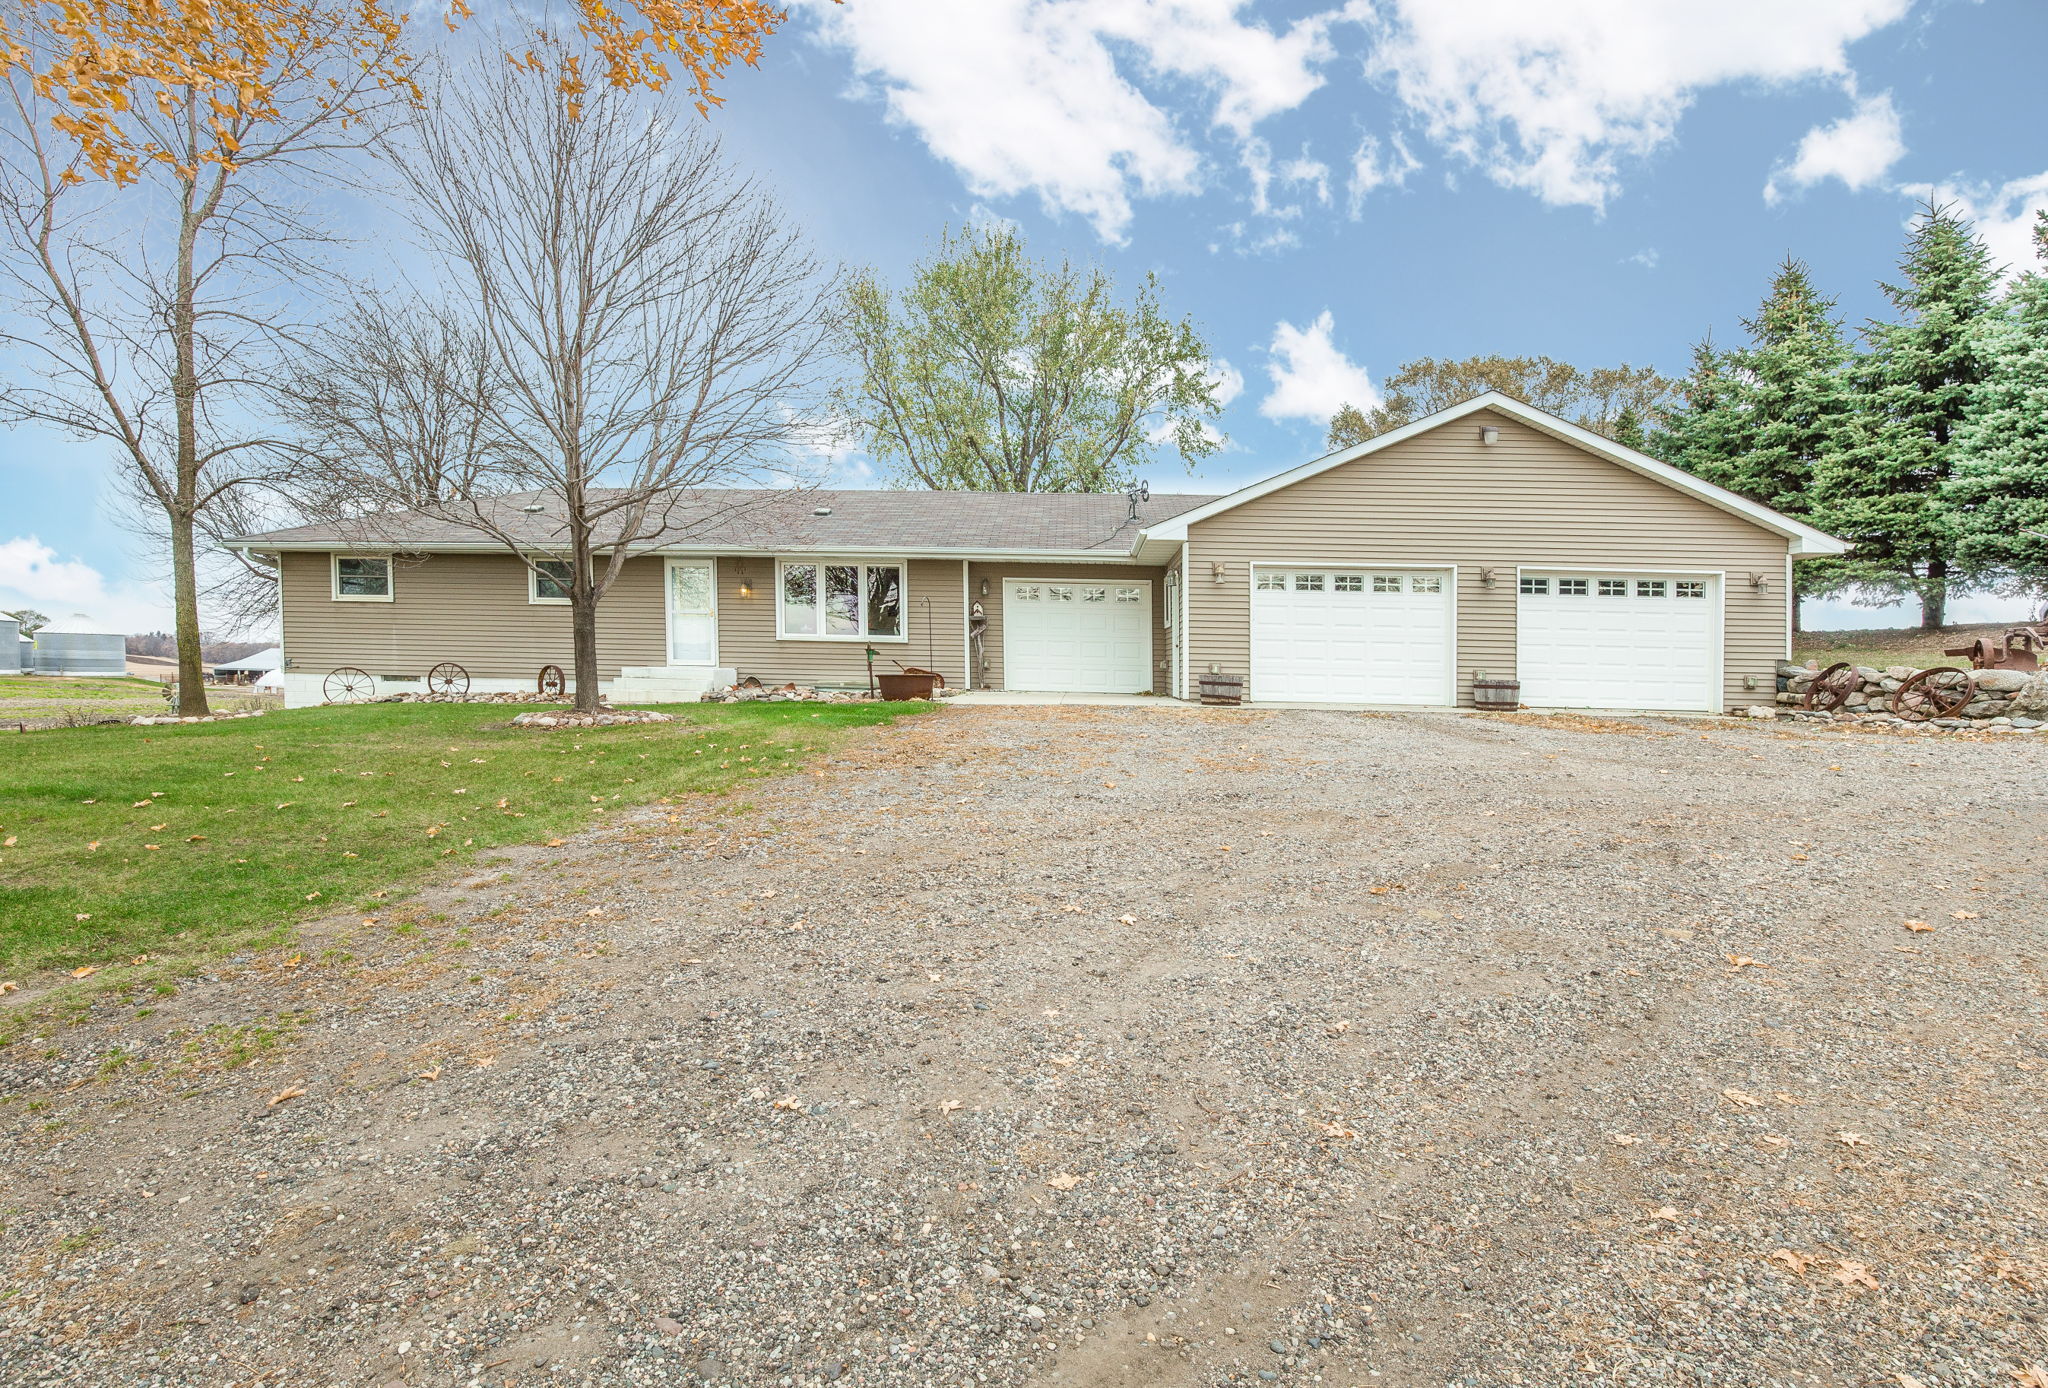  6474 Country Rd 11, Maple Plain, MN 55359, US